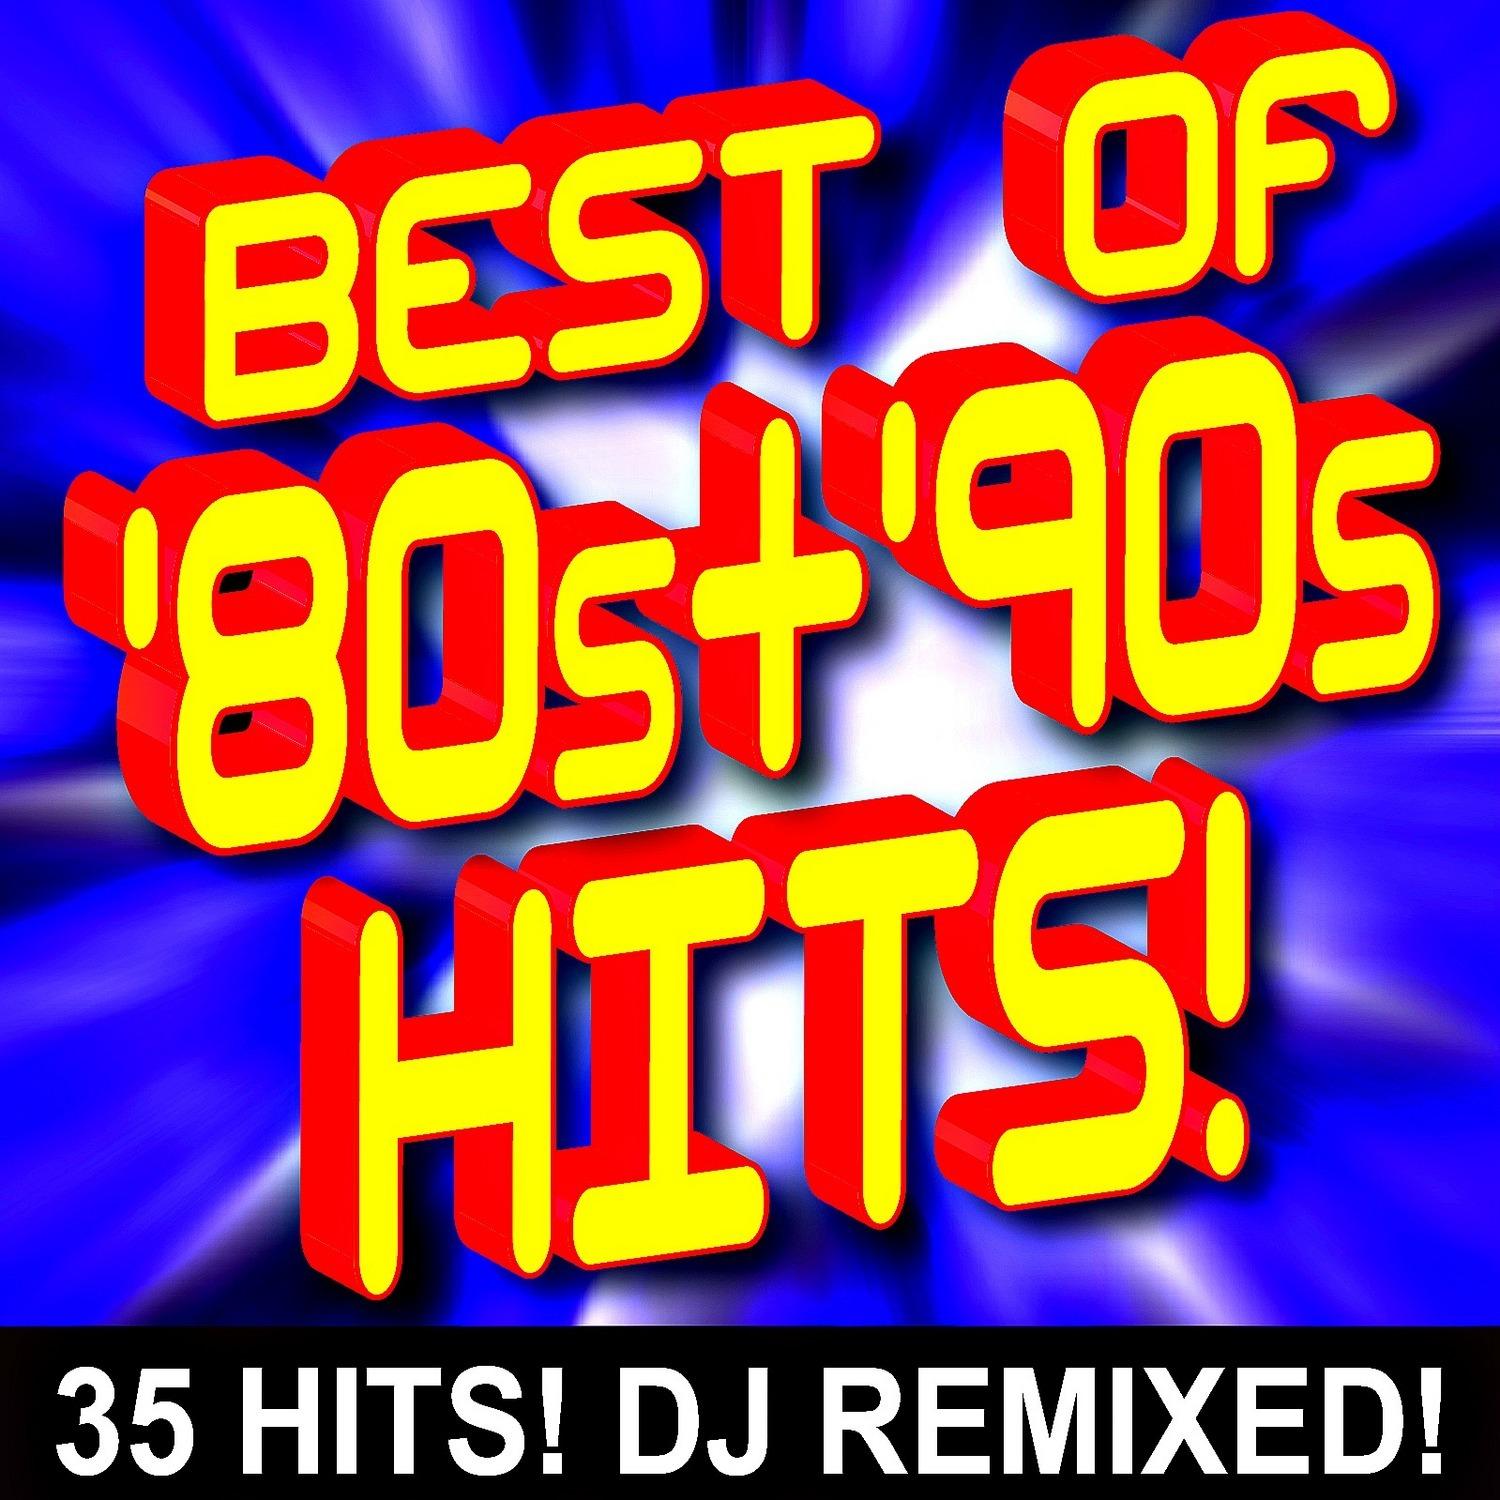 Best of 80s  90s Hits Workout  35 Hits DJ Remixed